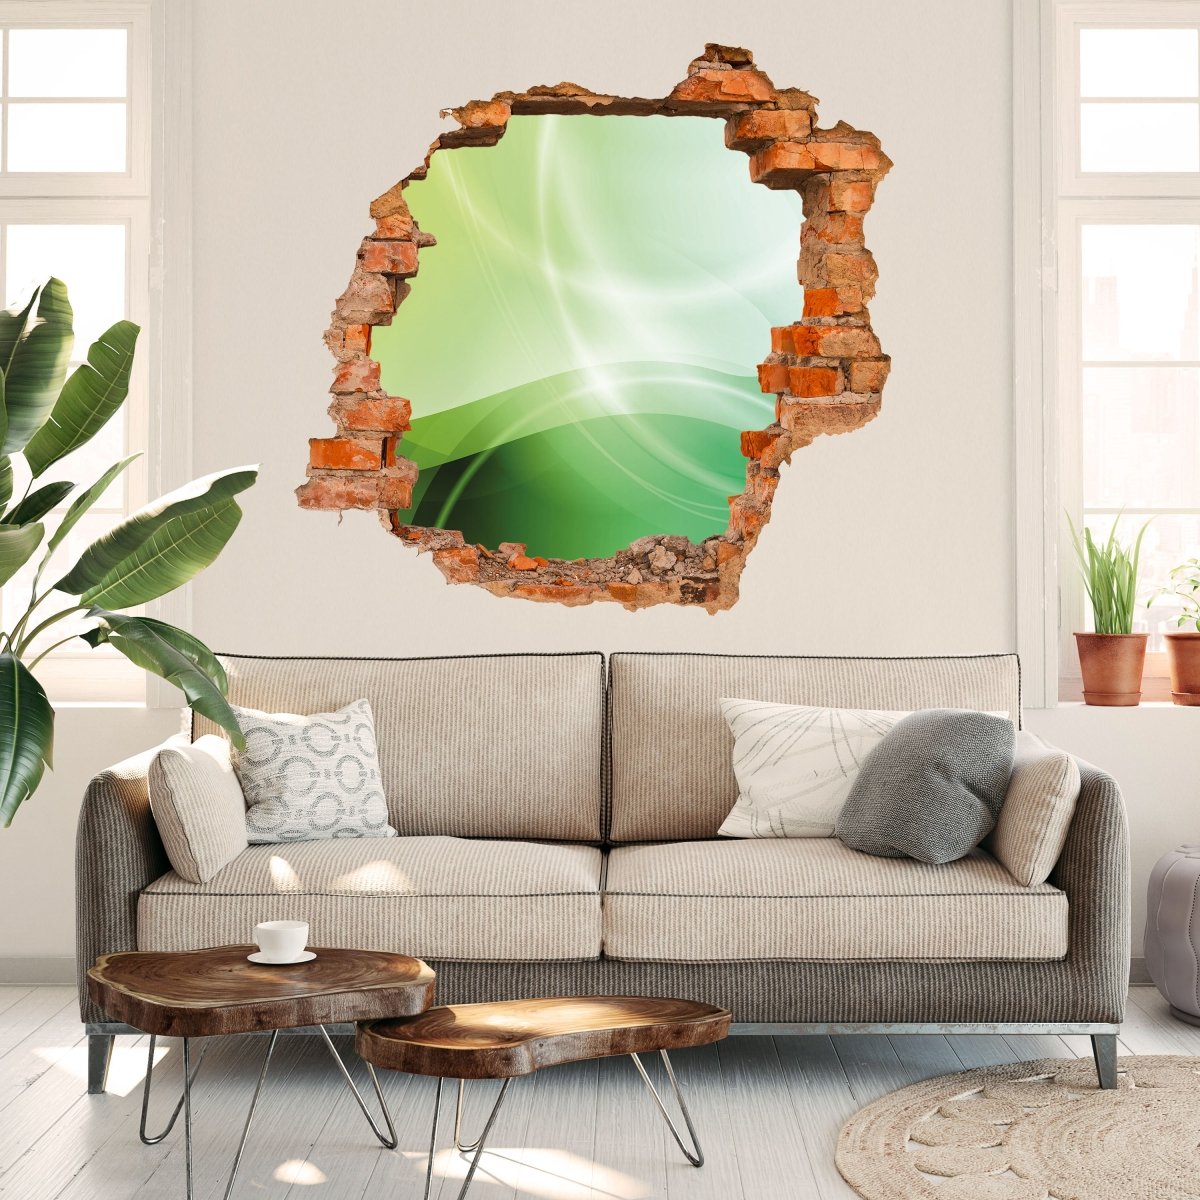 3D Wall Sticker Abstract Green Dream - Wall Decal M0429